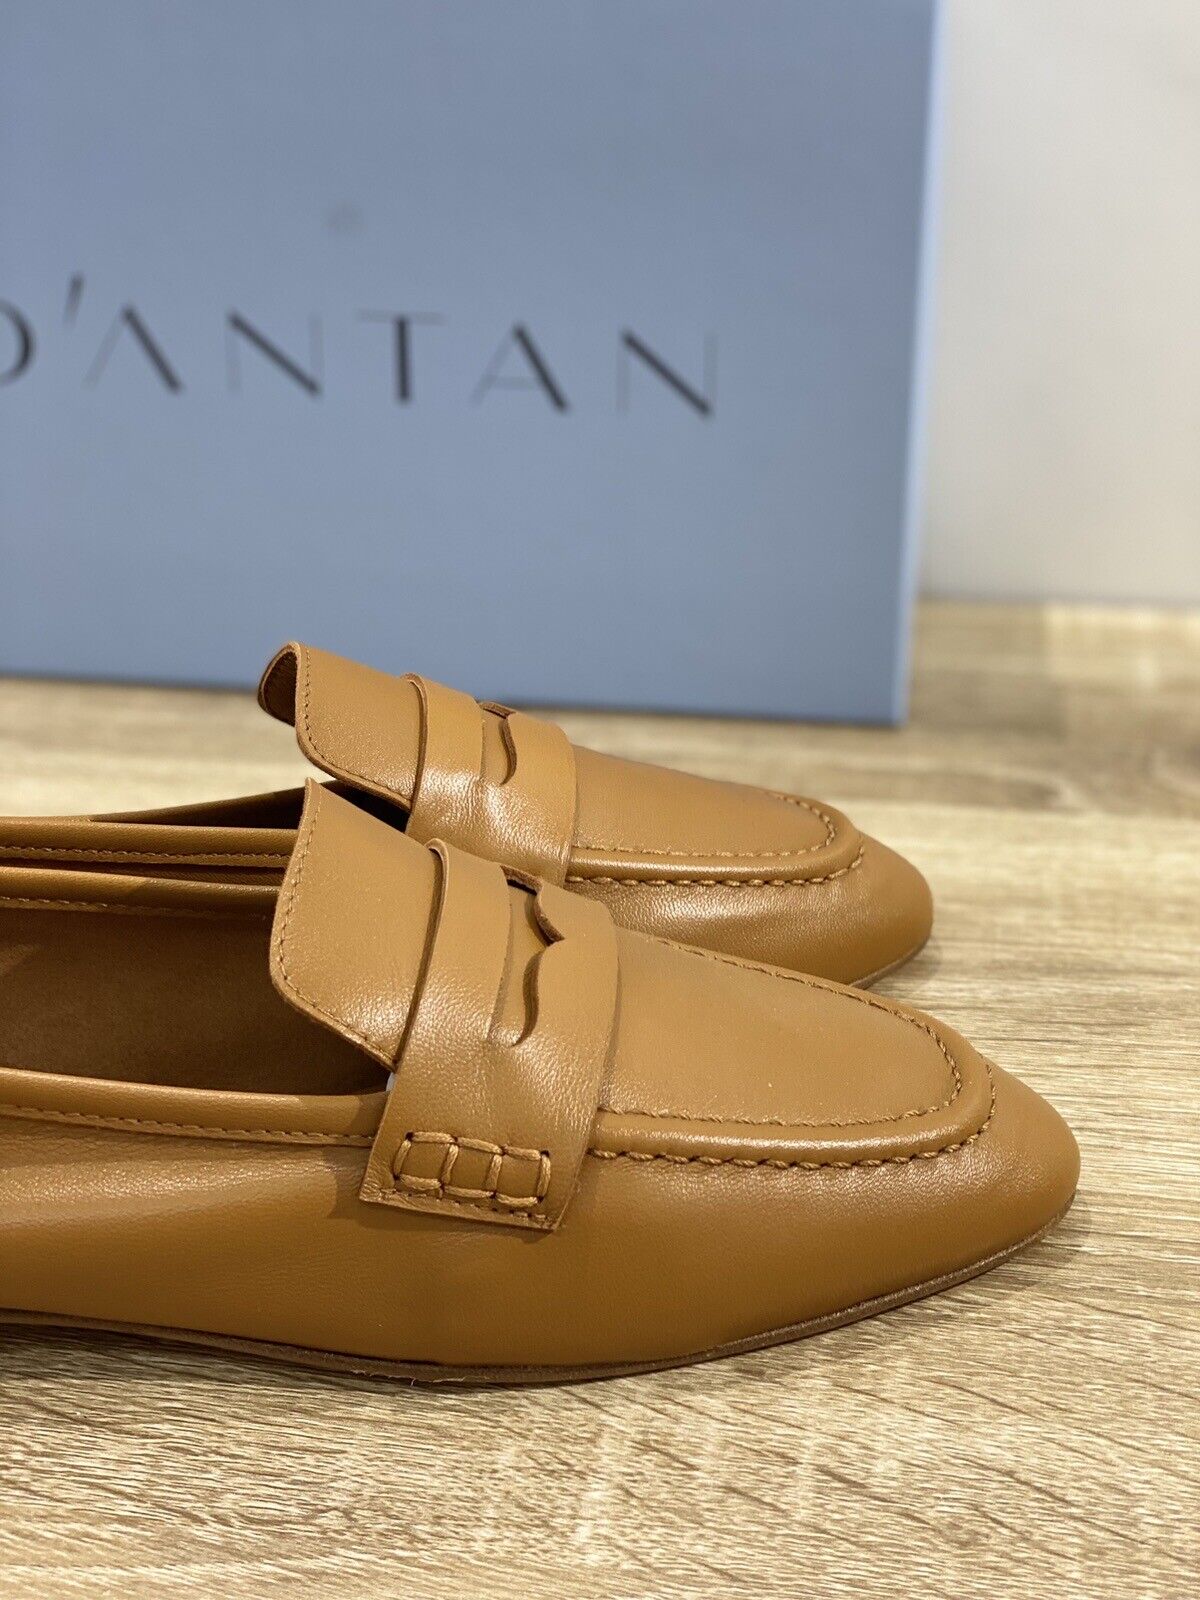 D’antan Mocassino Donna Pelle Cuoio Made In Italy 41